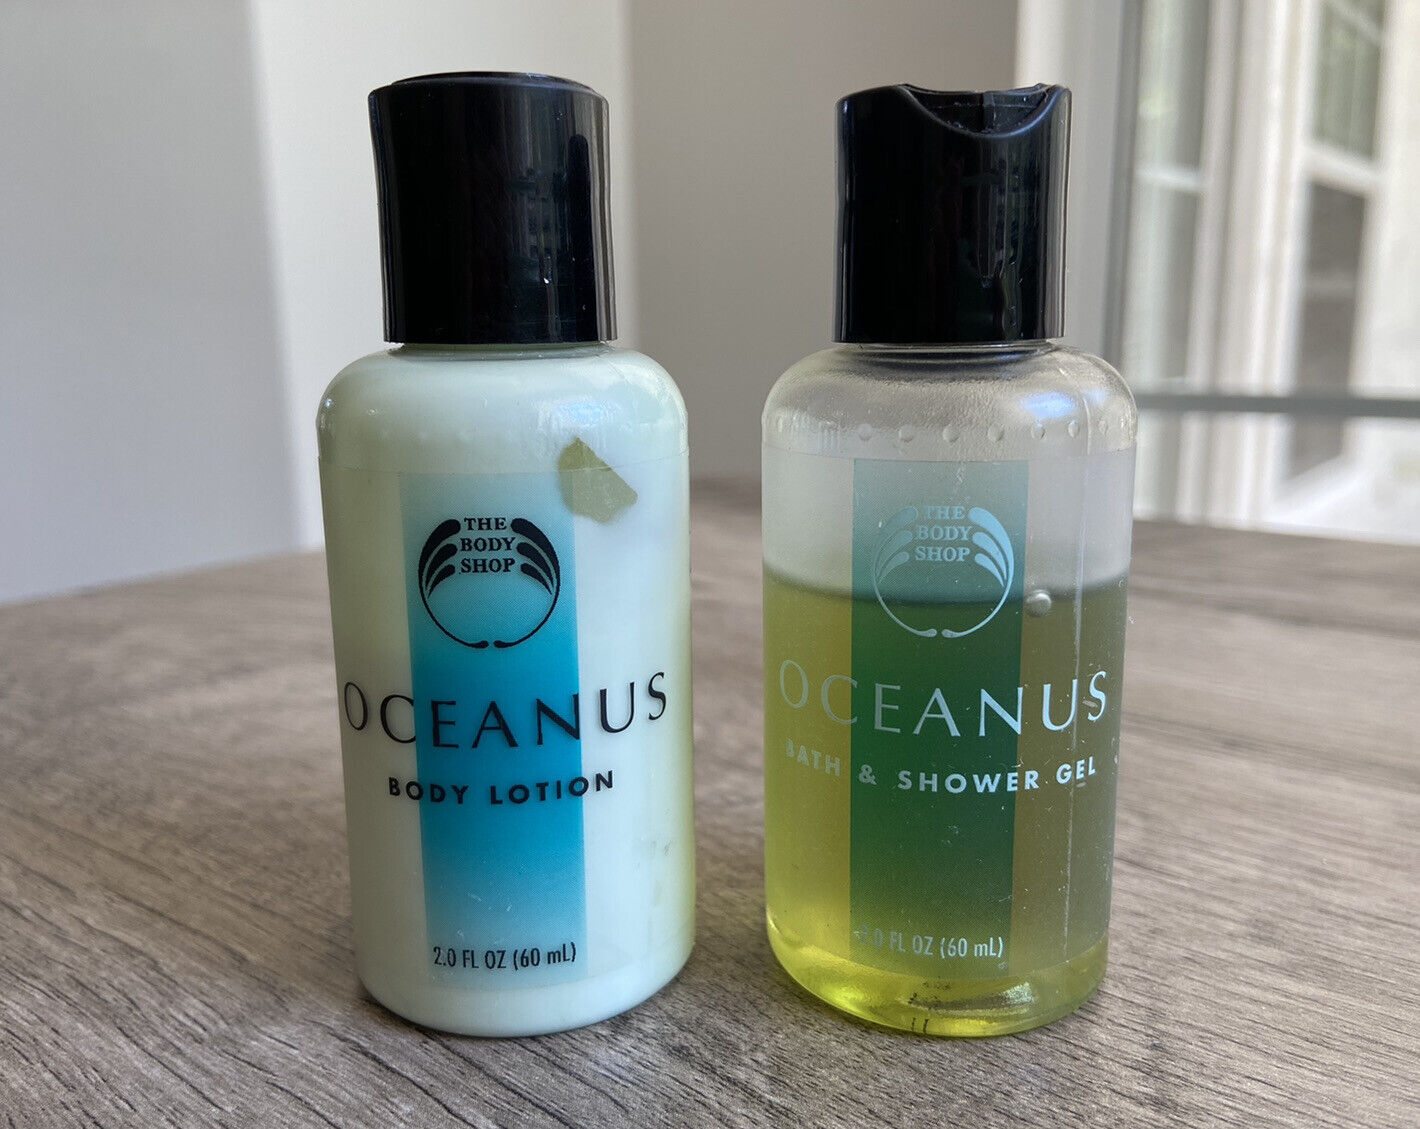 Vintage The Body Shop Oceanus Body Lotion And Shower Gel